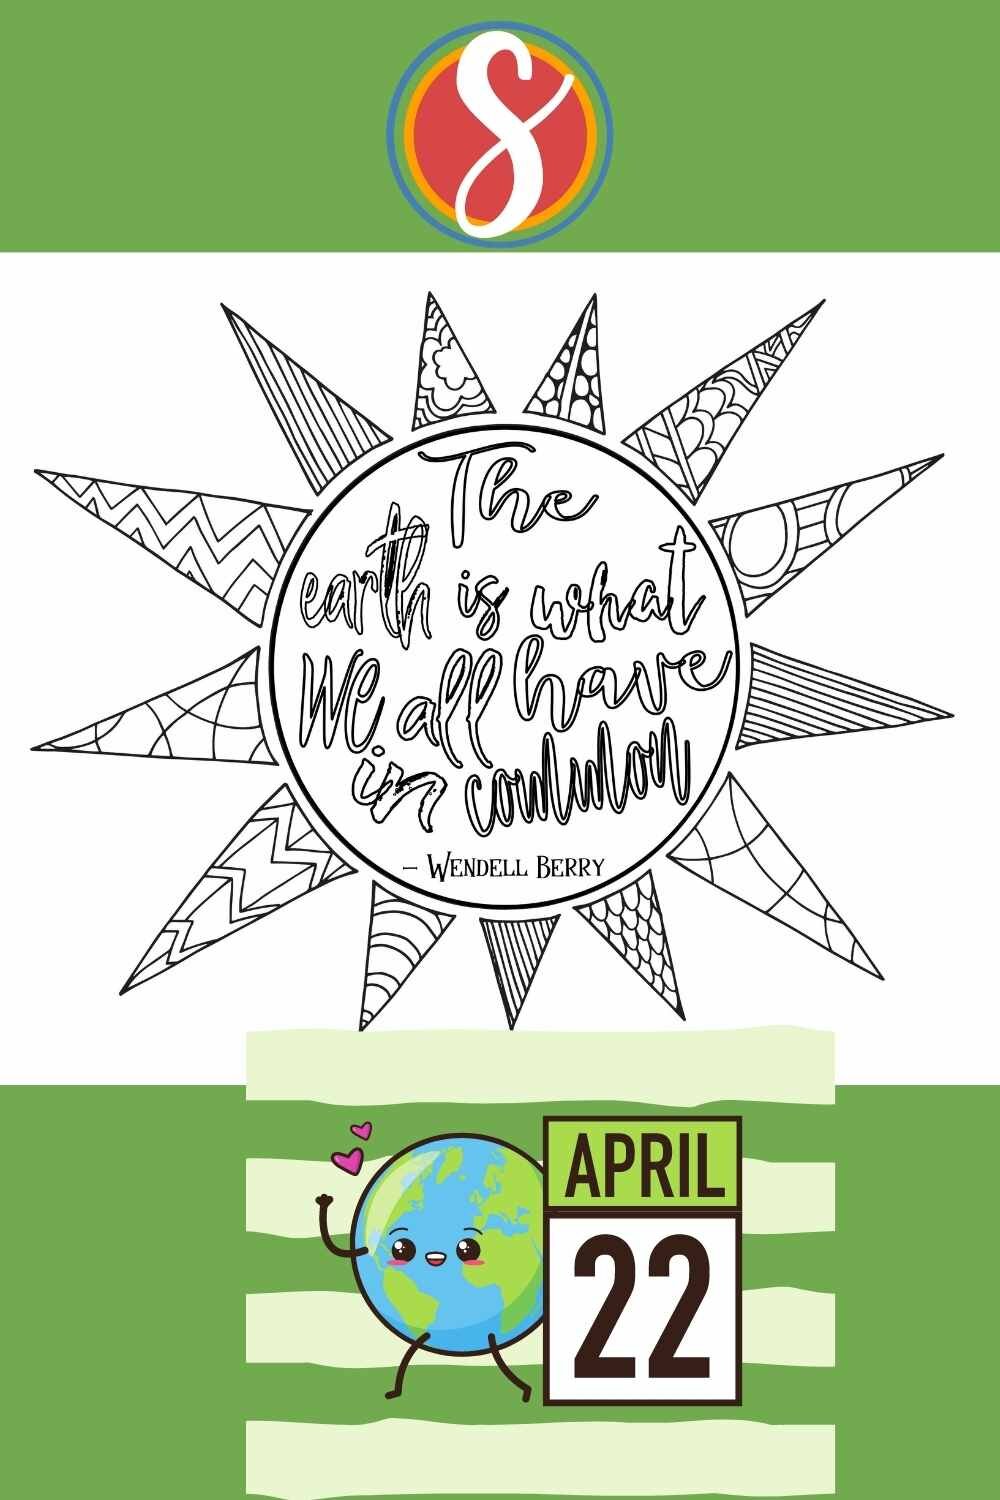 “The earth is what we all have in common” - Wendell Berry, free Earth Day coloring sheet from Stevie Doodles